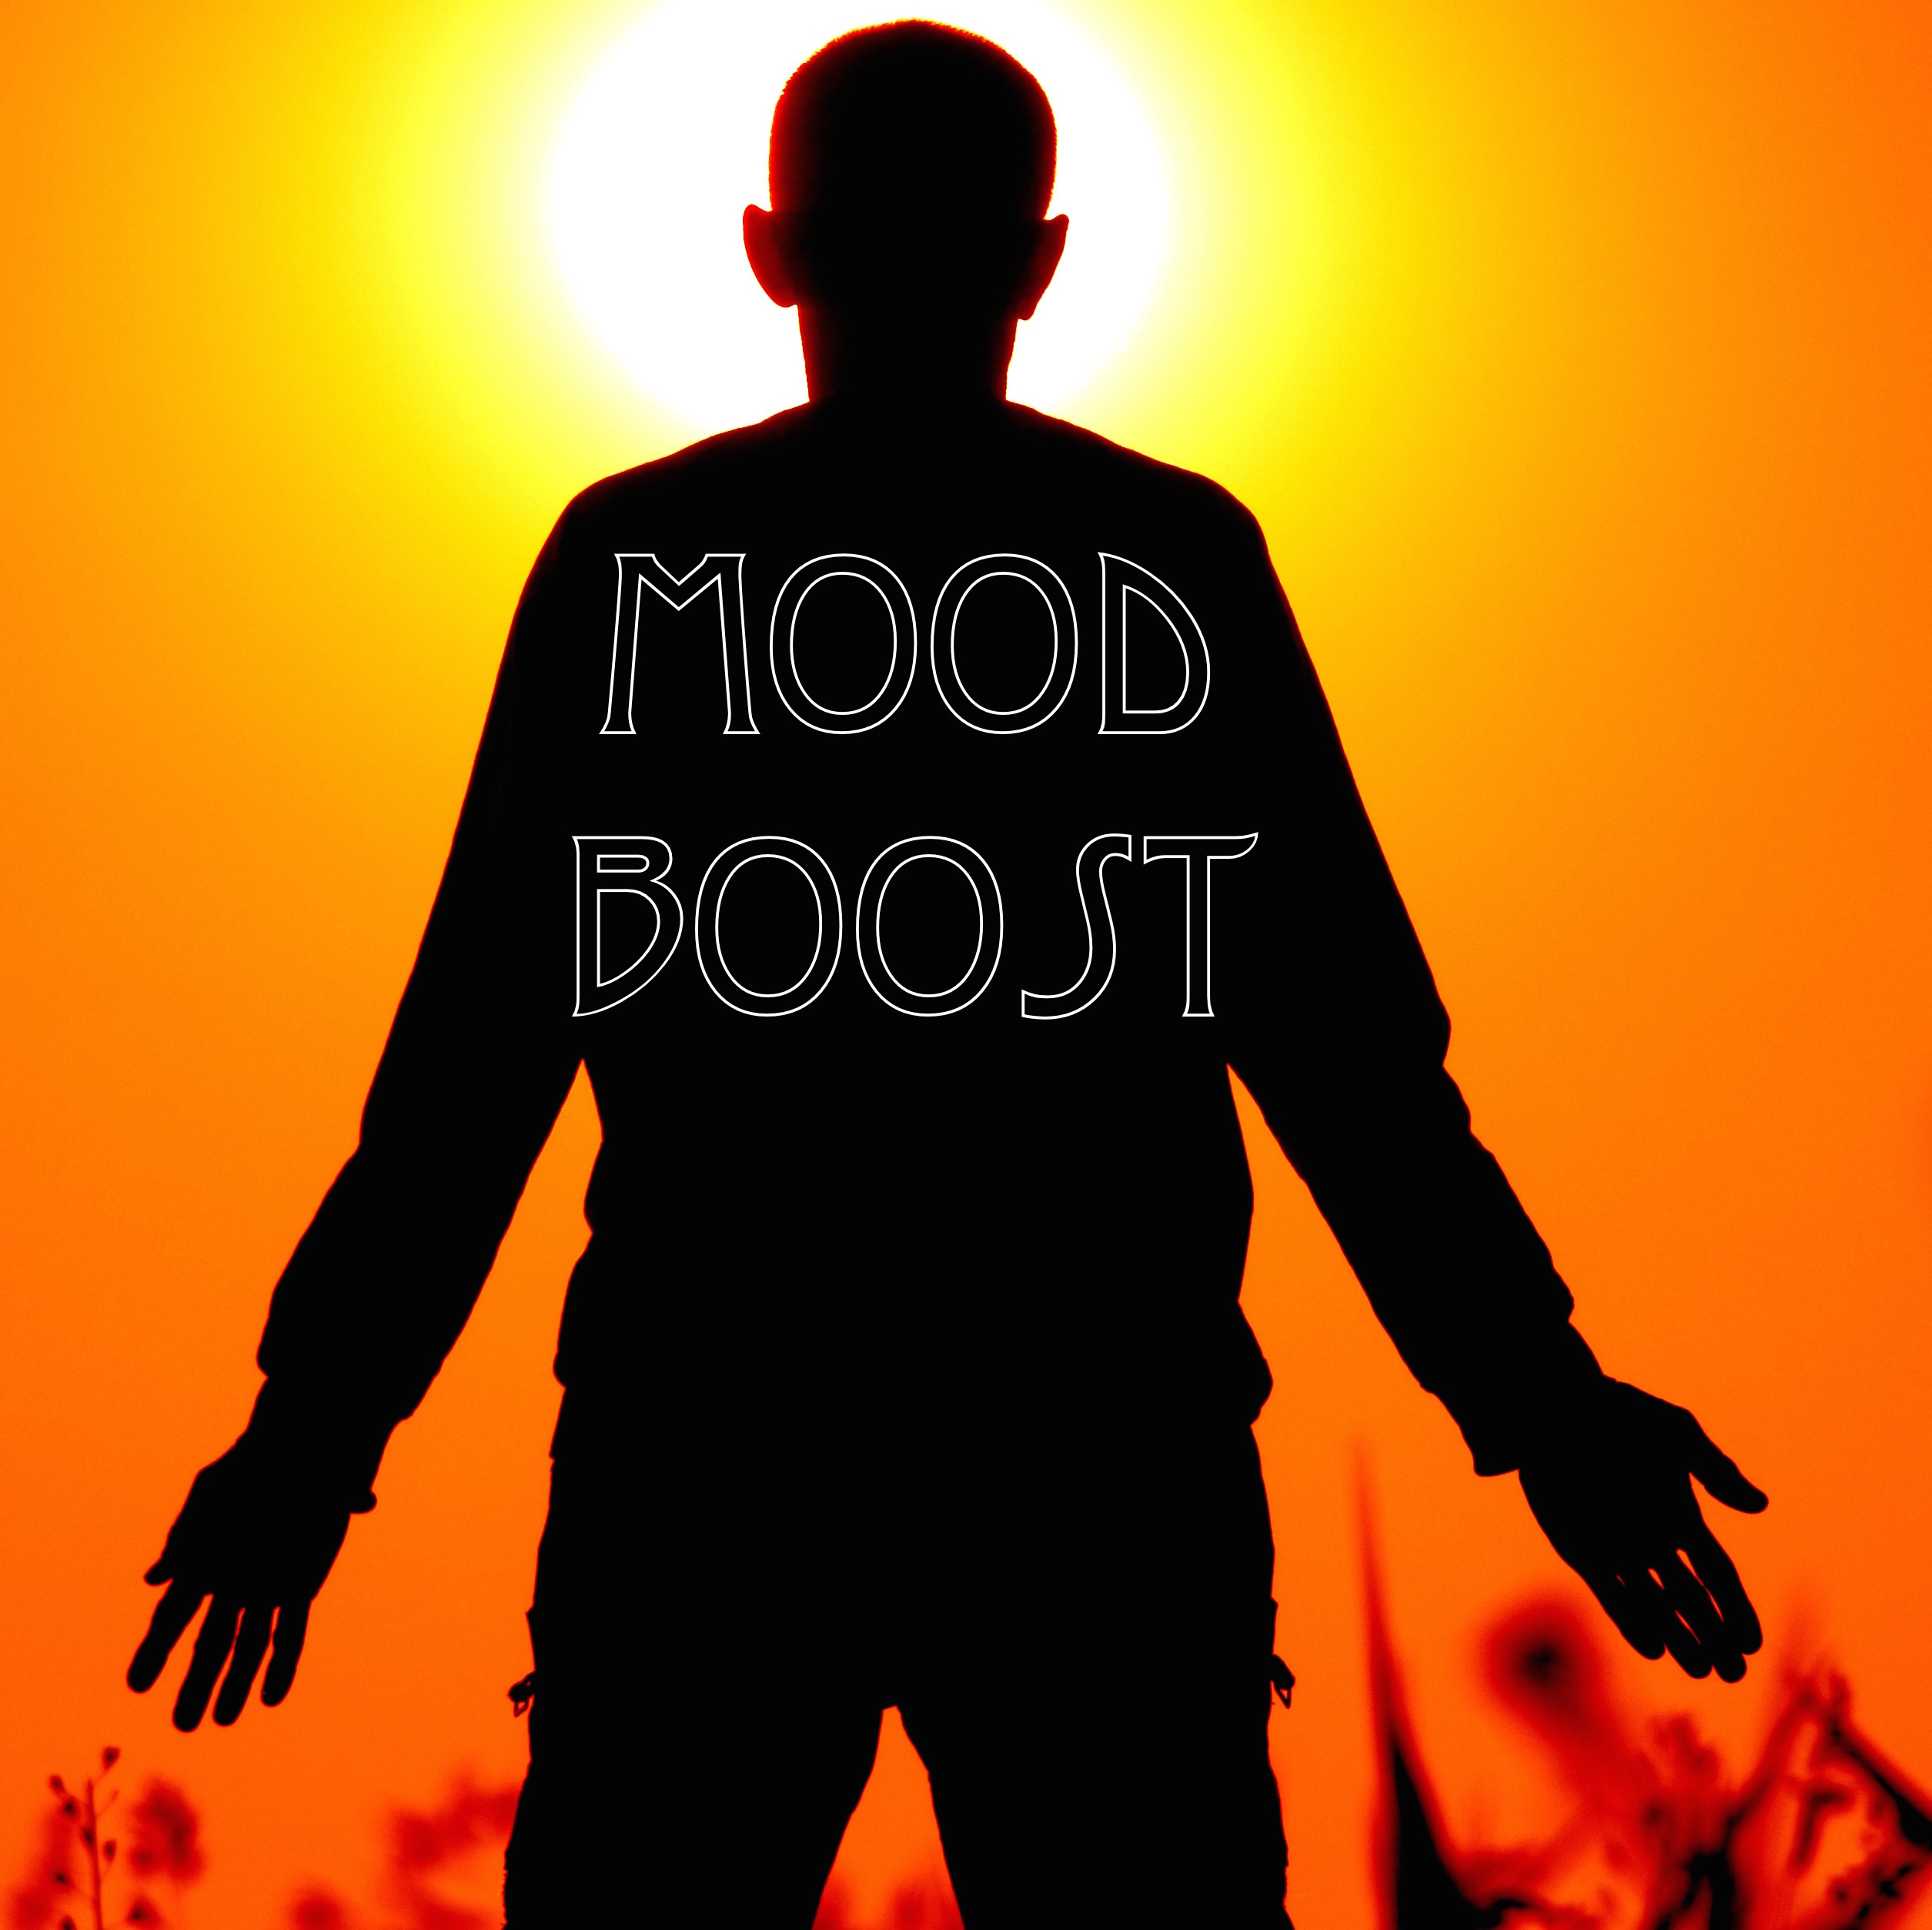 Mood Boost Collection - Ultimate Stress Relief with Relaxing Water Sounds for Better Mental Health, Deeper Sleep and Study Focus